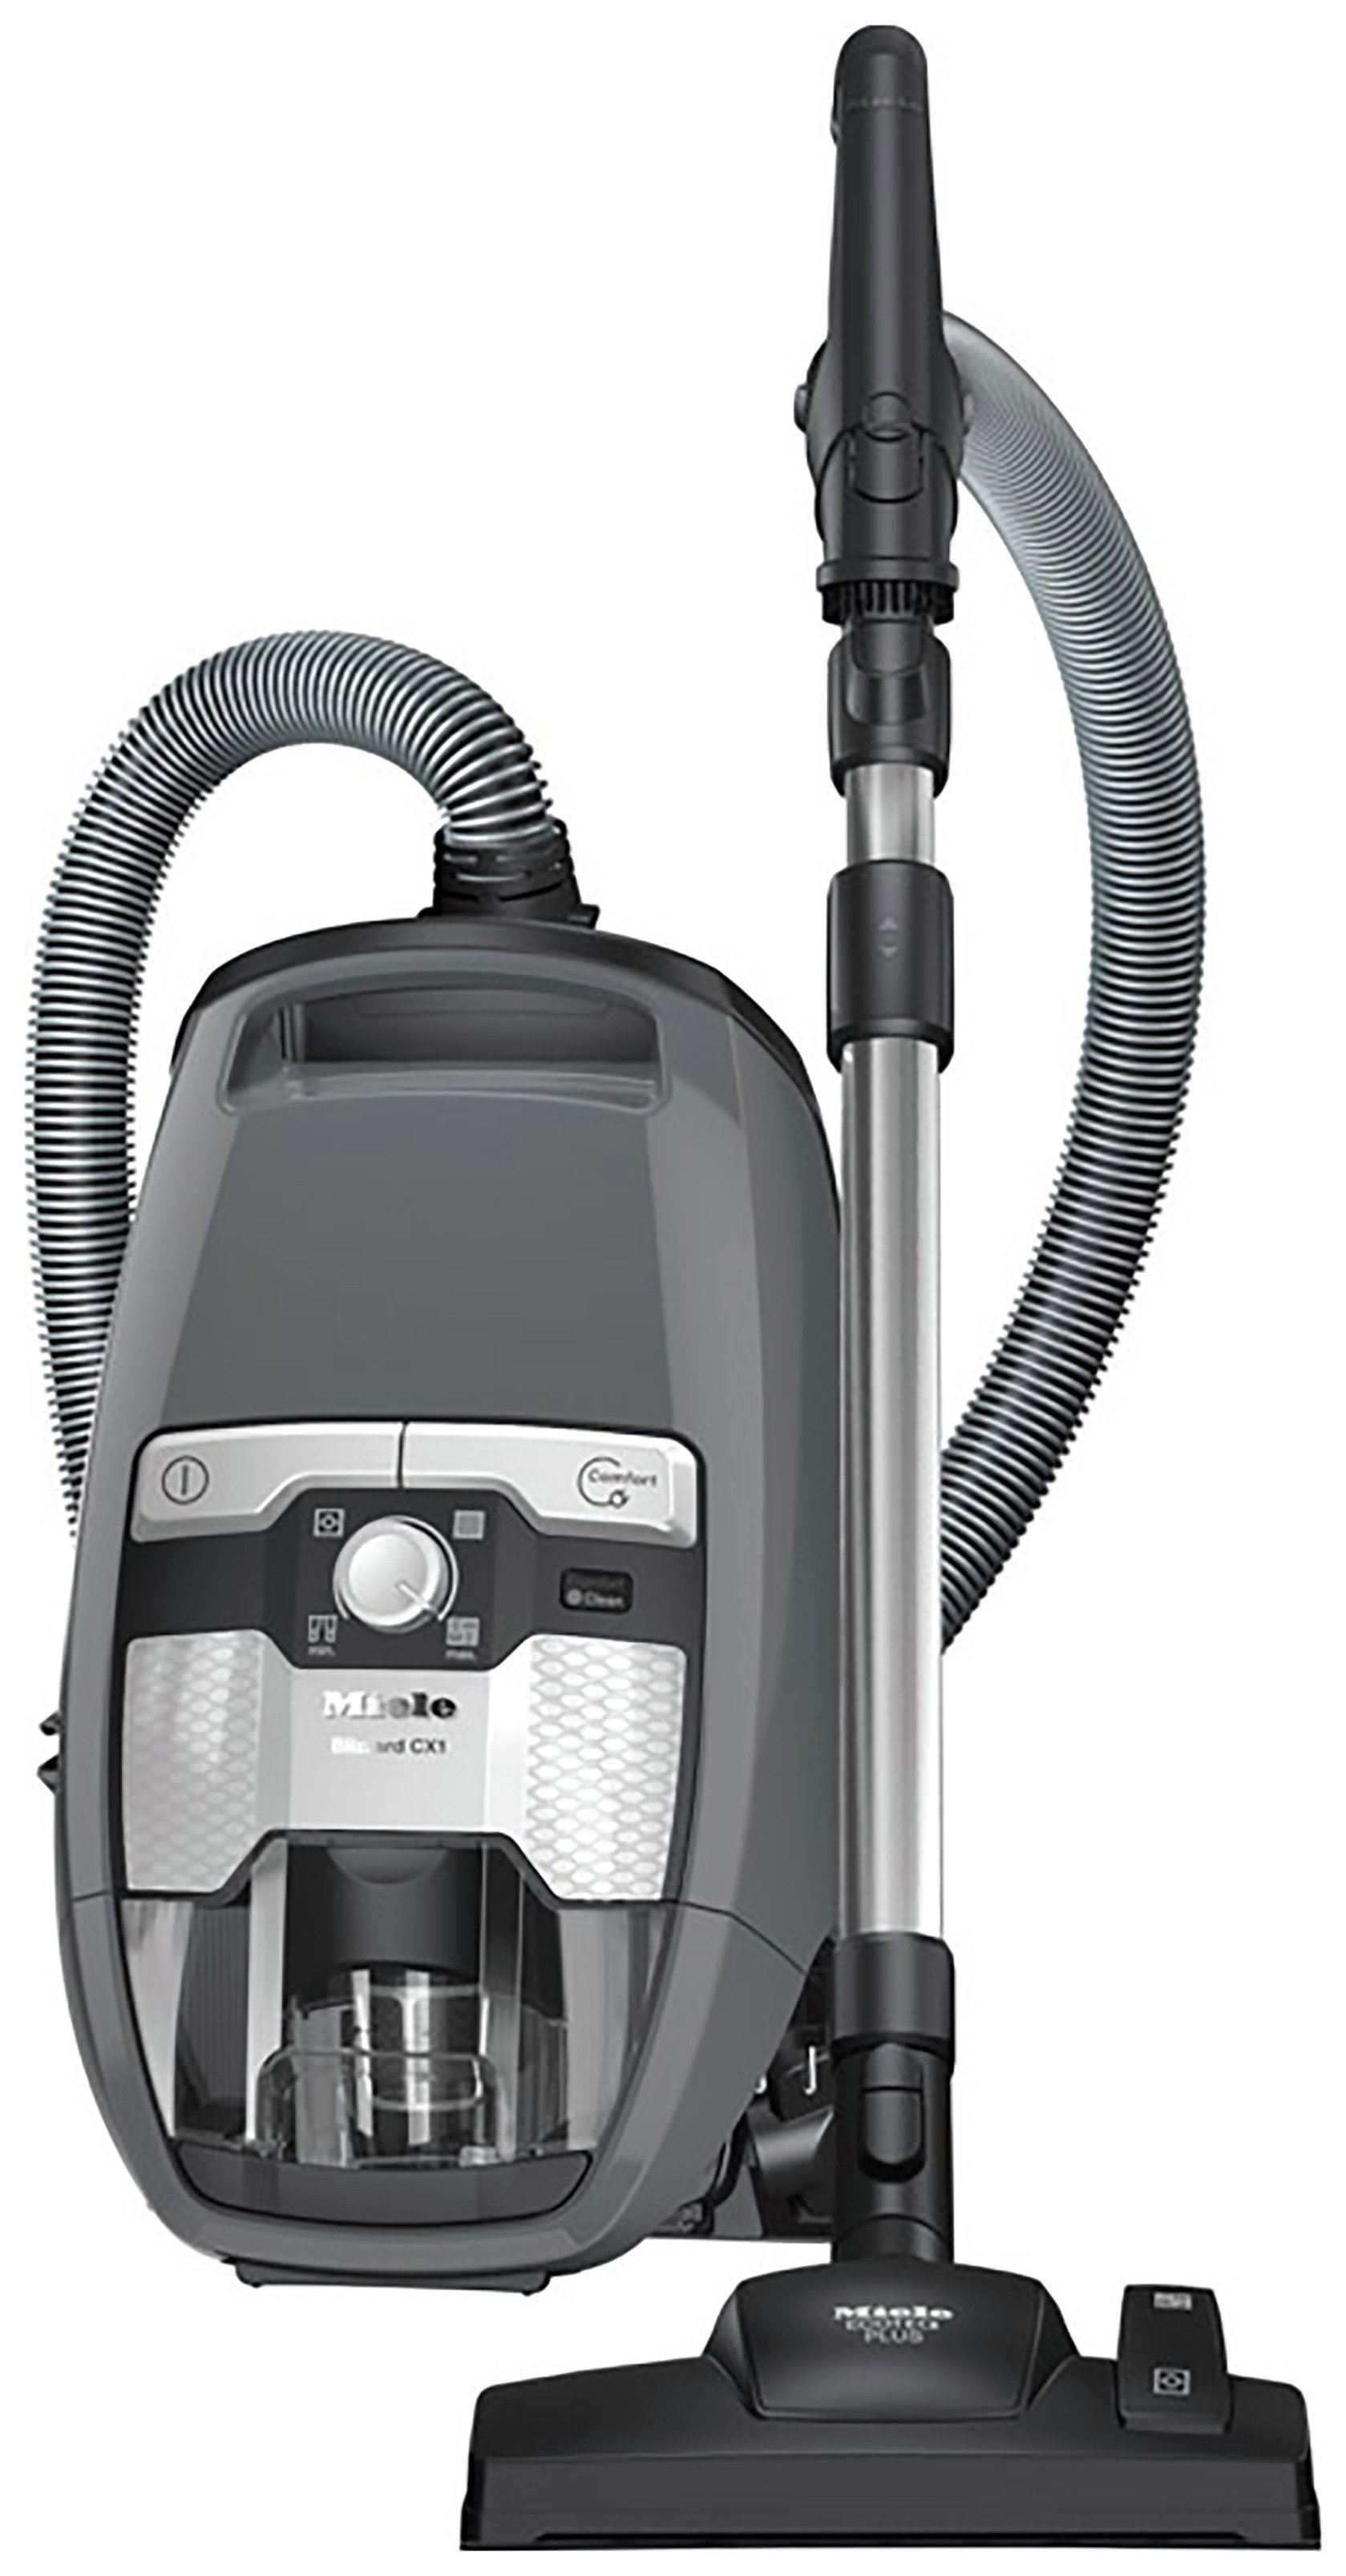 Miele CX1 Blizzard Excellence Vacuum Cleaner Review